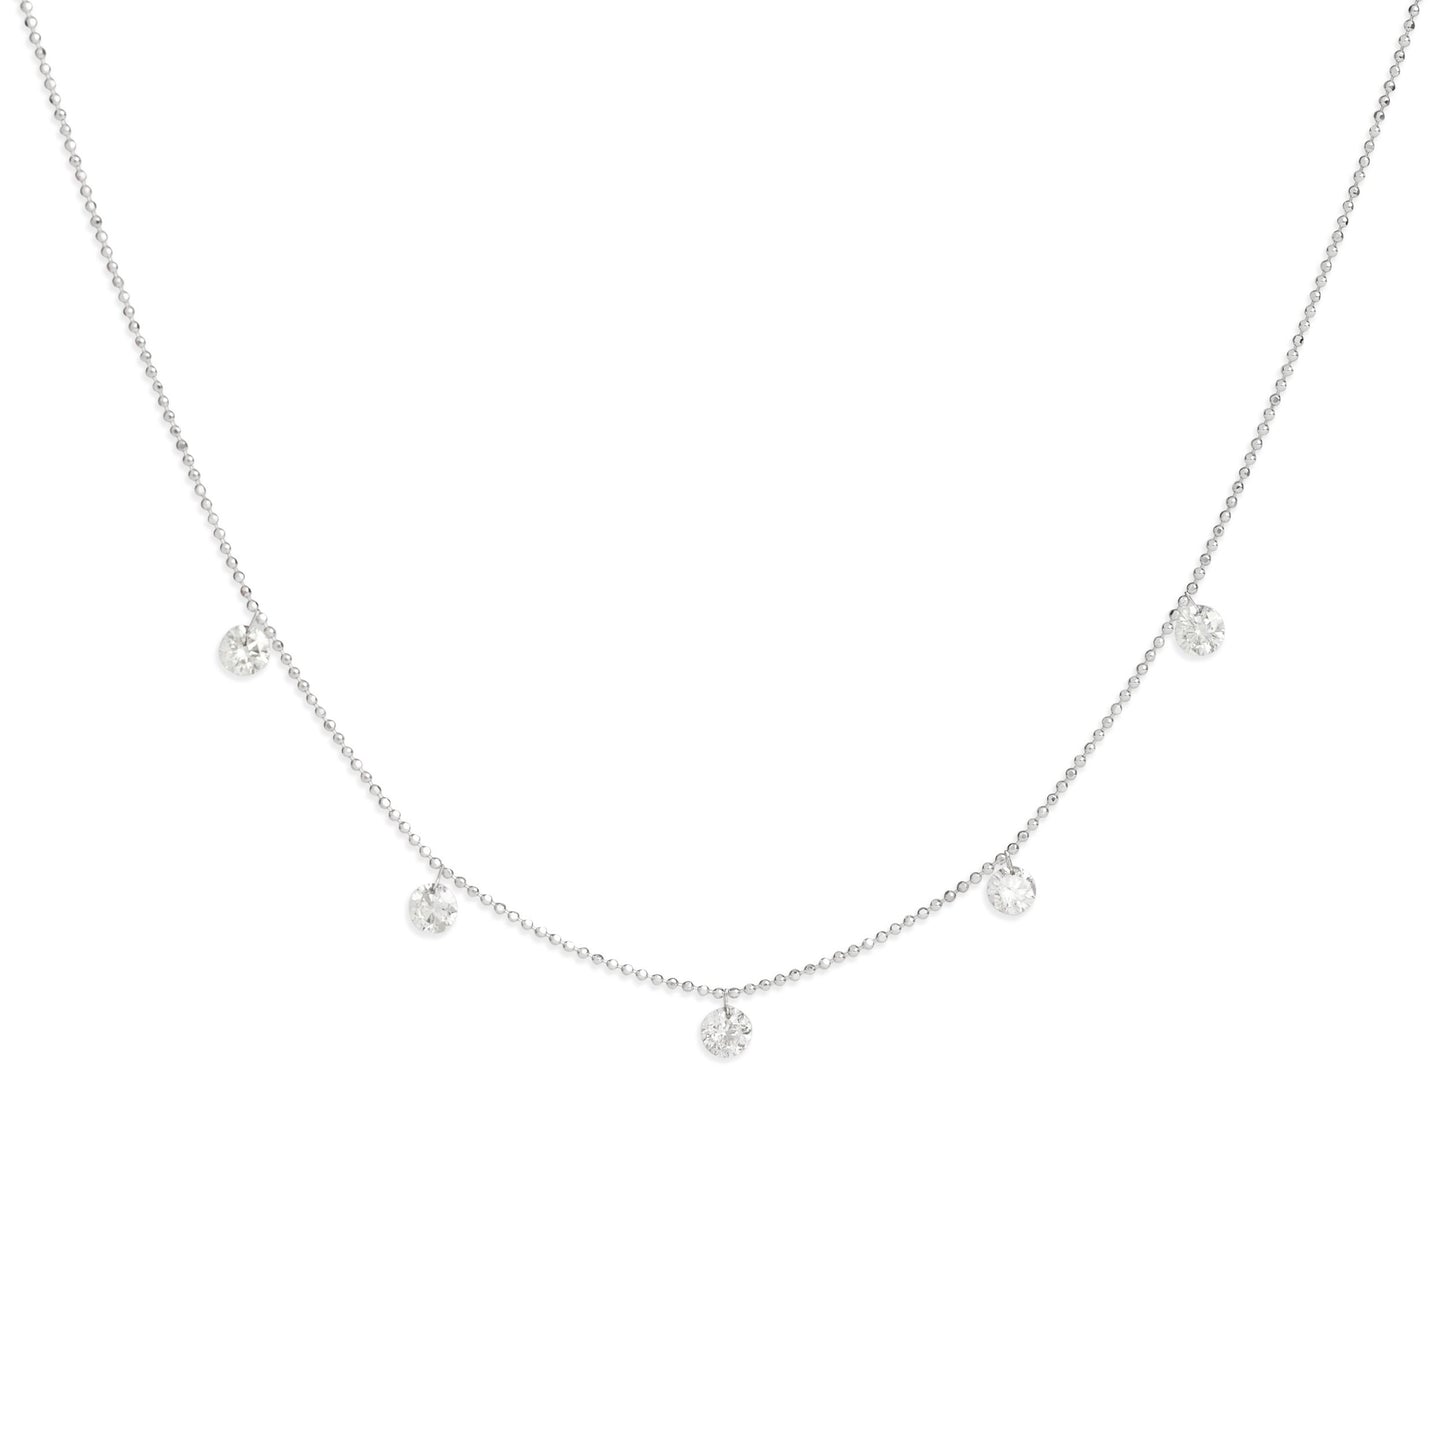 1.0 CT Five Floating Diamond Necklace